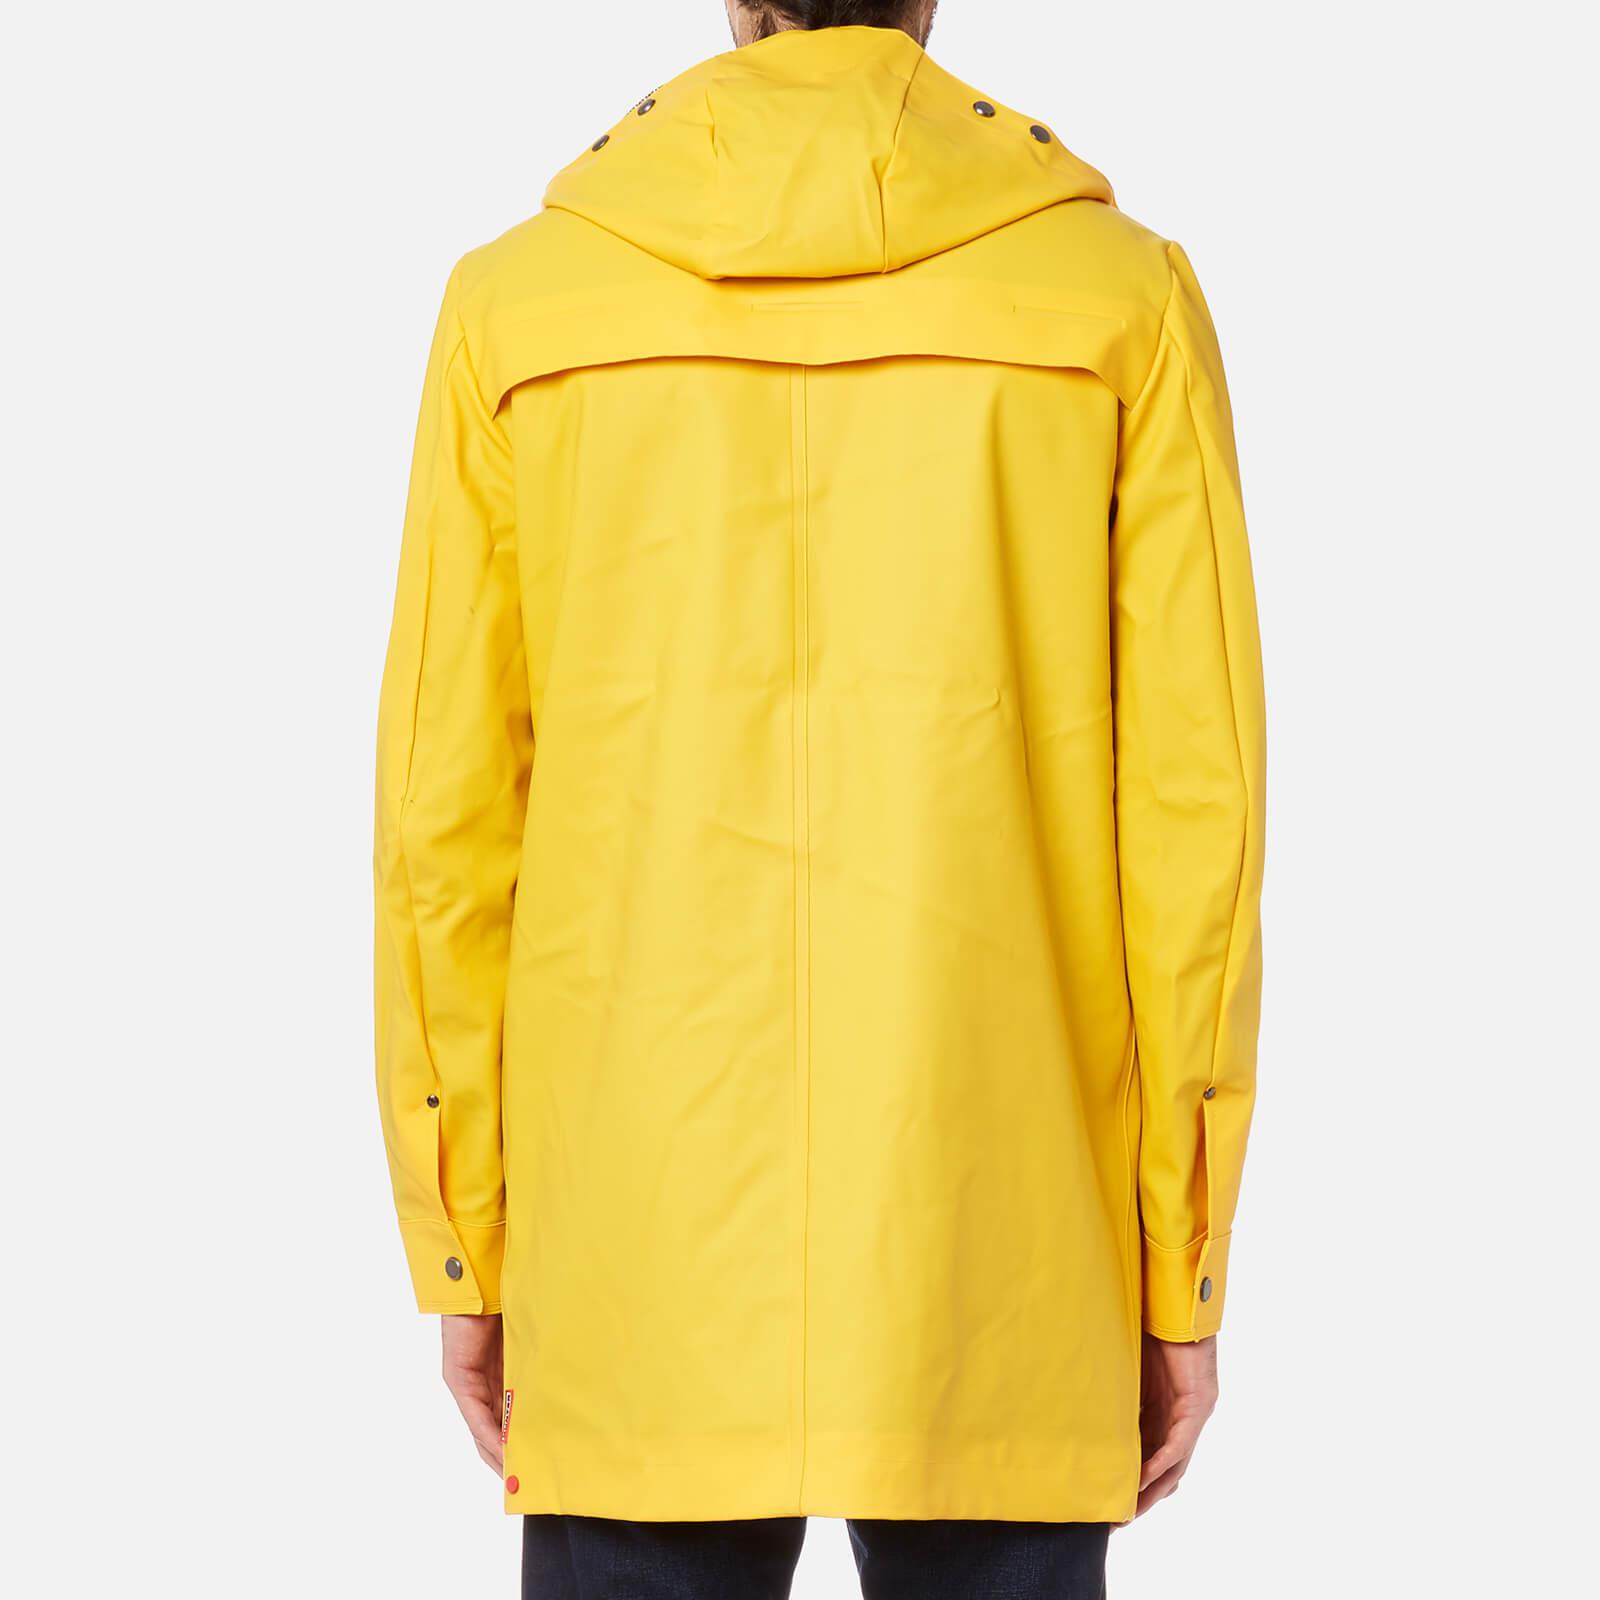 HUNTER Synthetic Original Rubberised Fishing Coat in Yellow for Men - Lyst